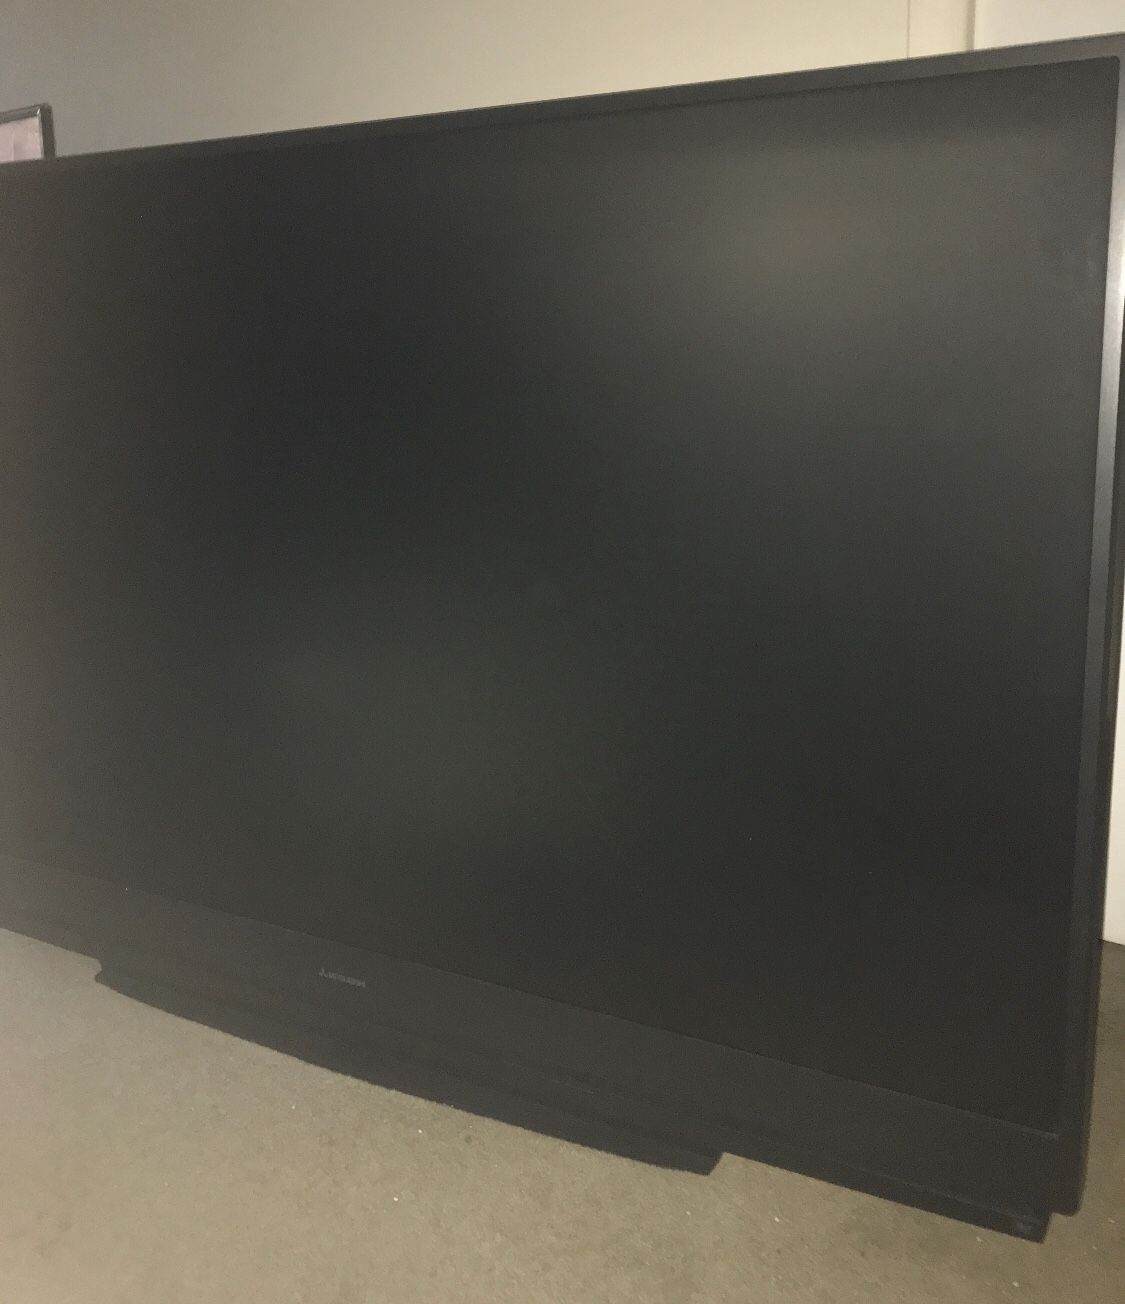 Mitsubishi 73” rear projection TV, FREE, need truck/van to haul, not working